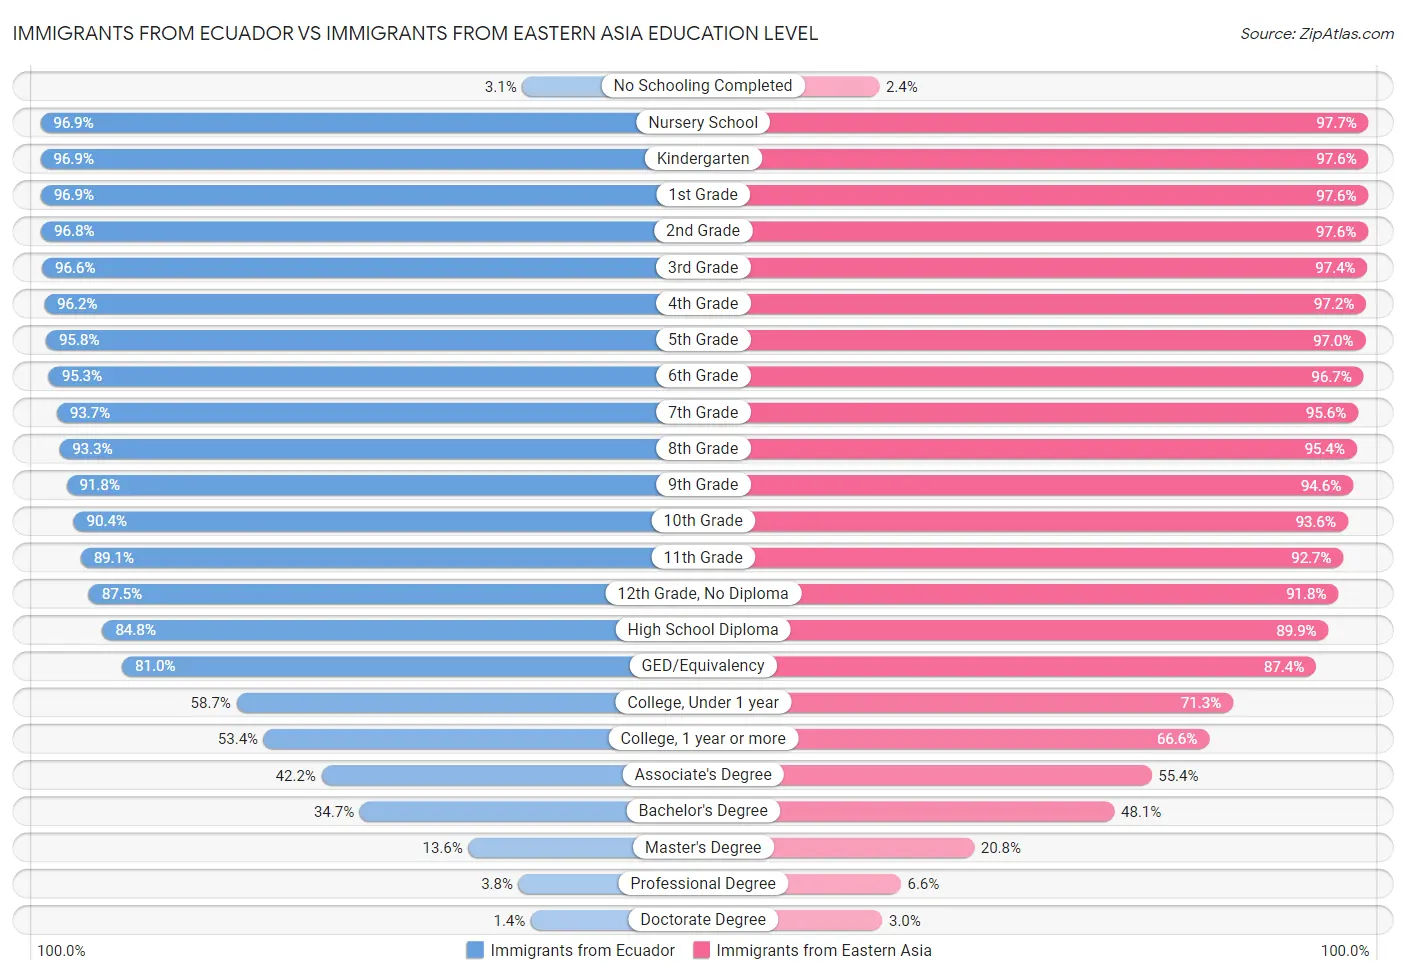 Immigrants from Ecuador vs Immigrants from Eastern Asia Education Level